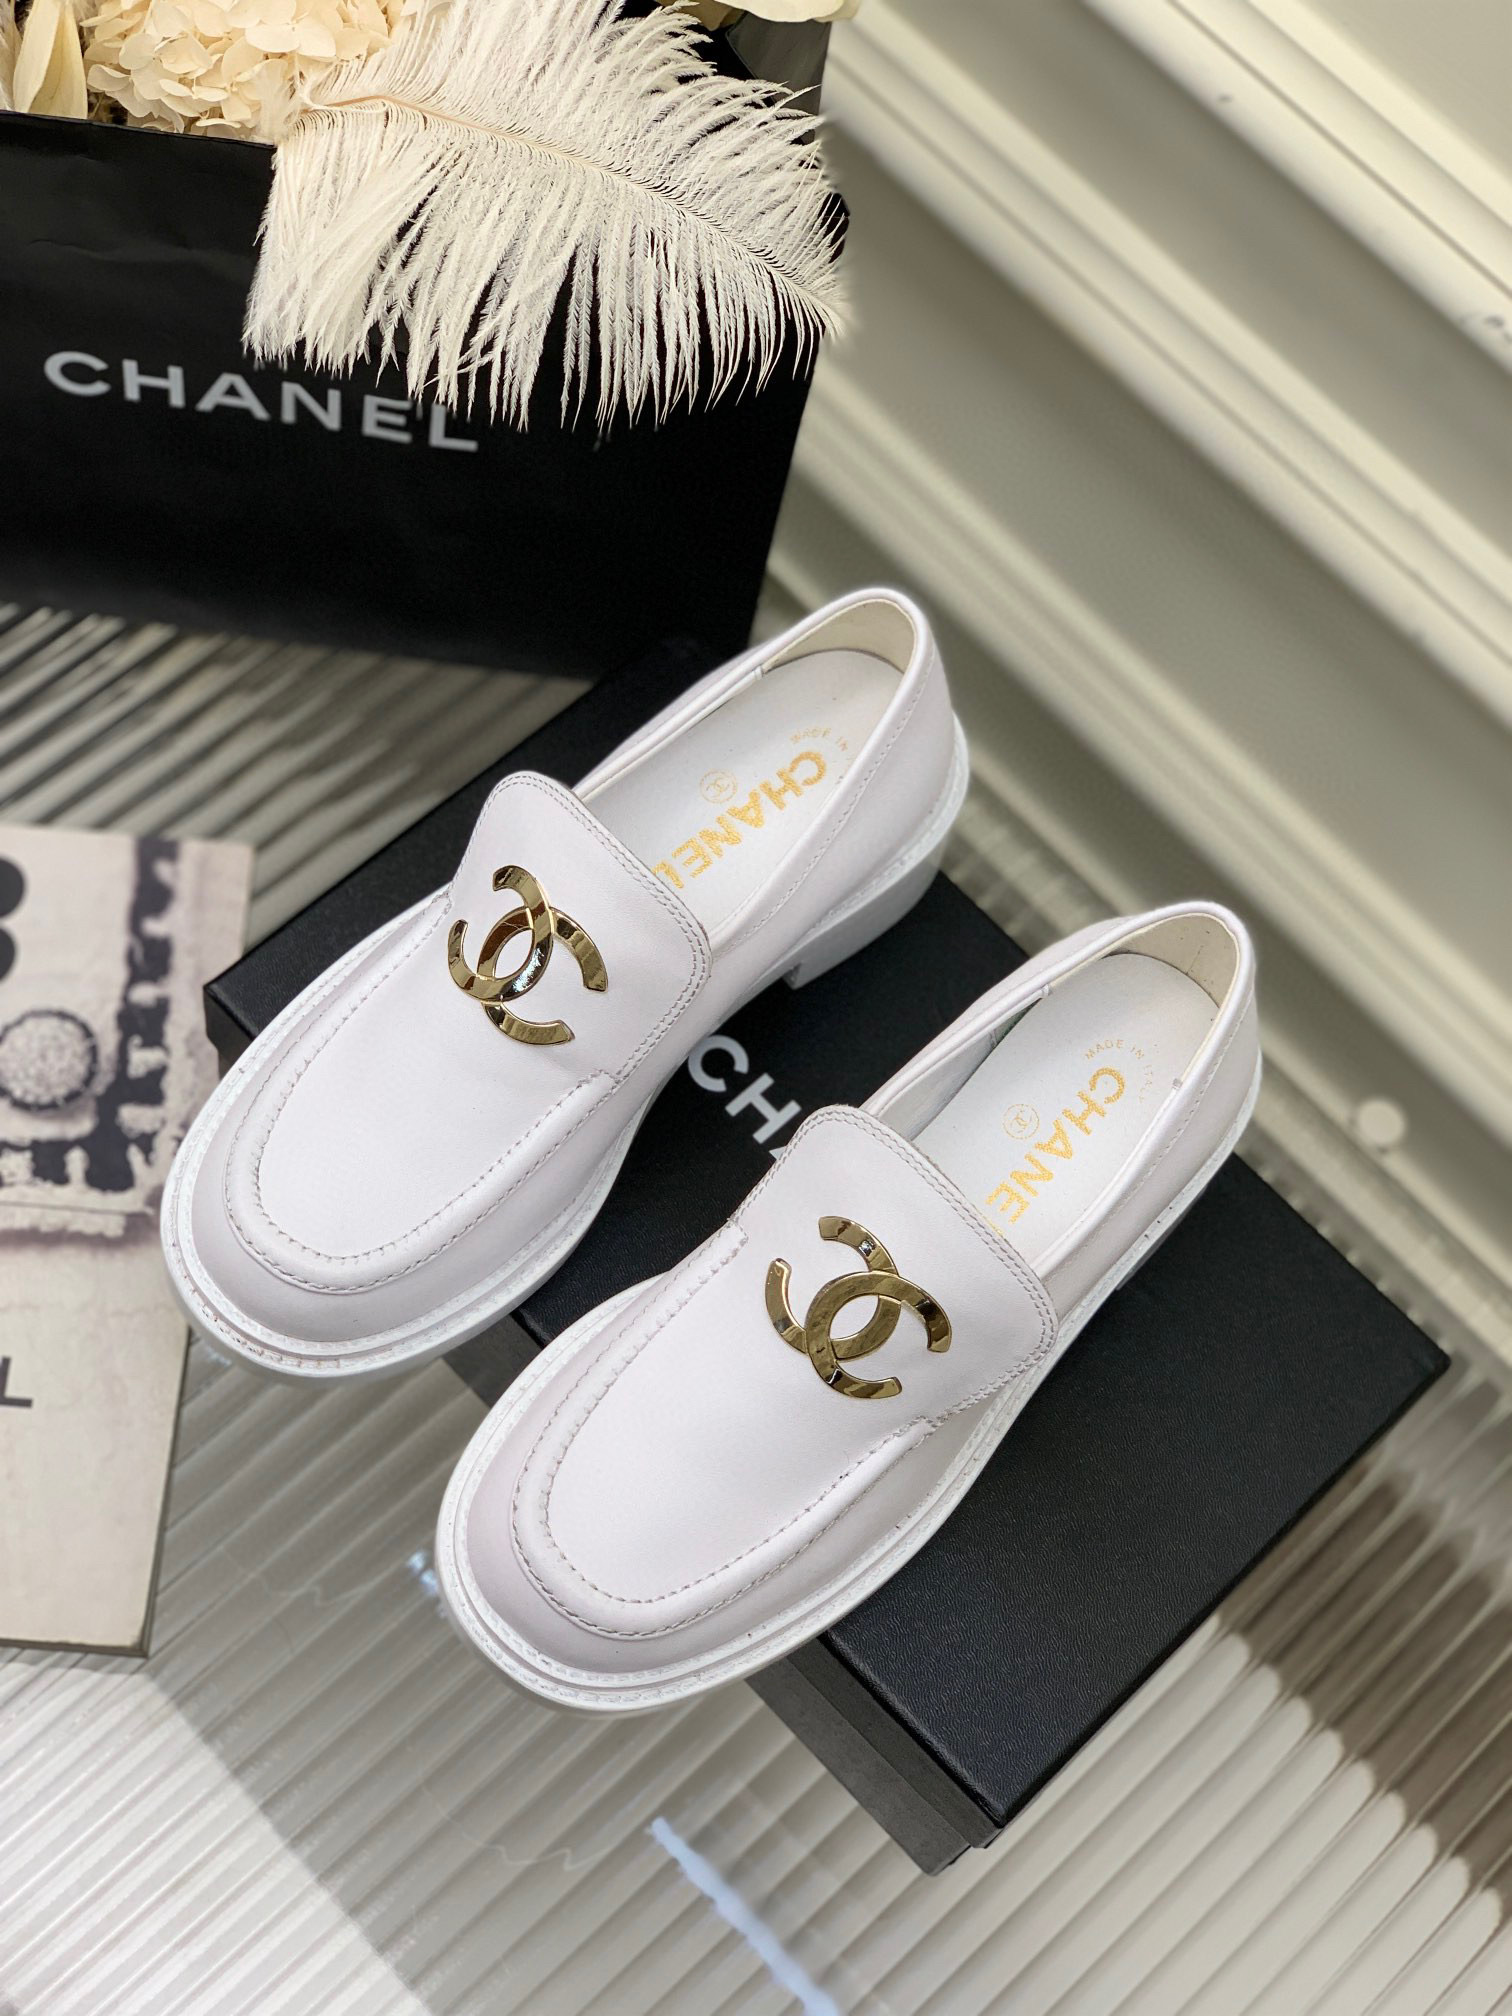 CHANEL  Shoes  Chanel White Loafer Size 38 2 Brand New Never Worn   Poshmark